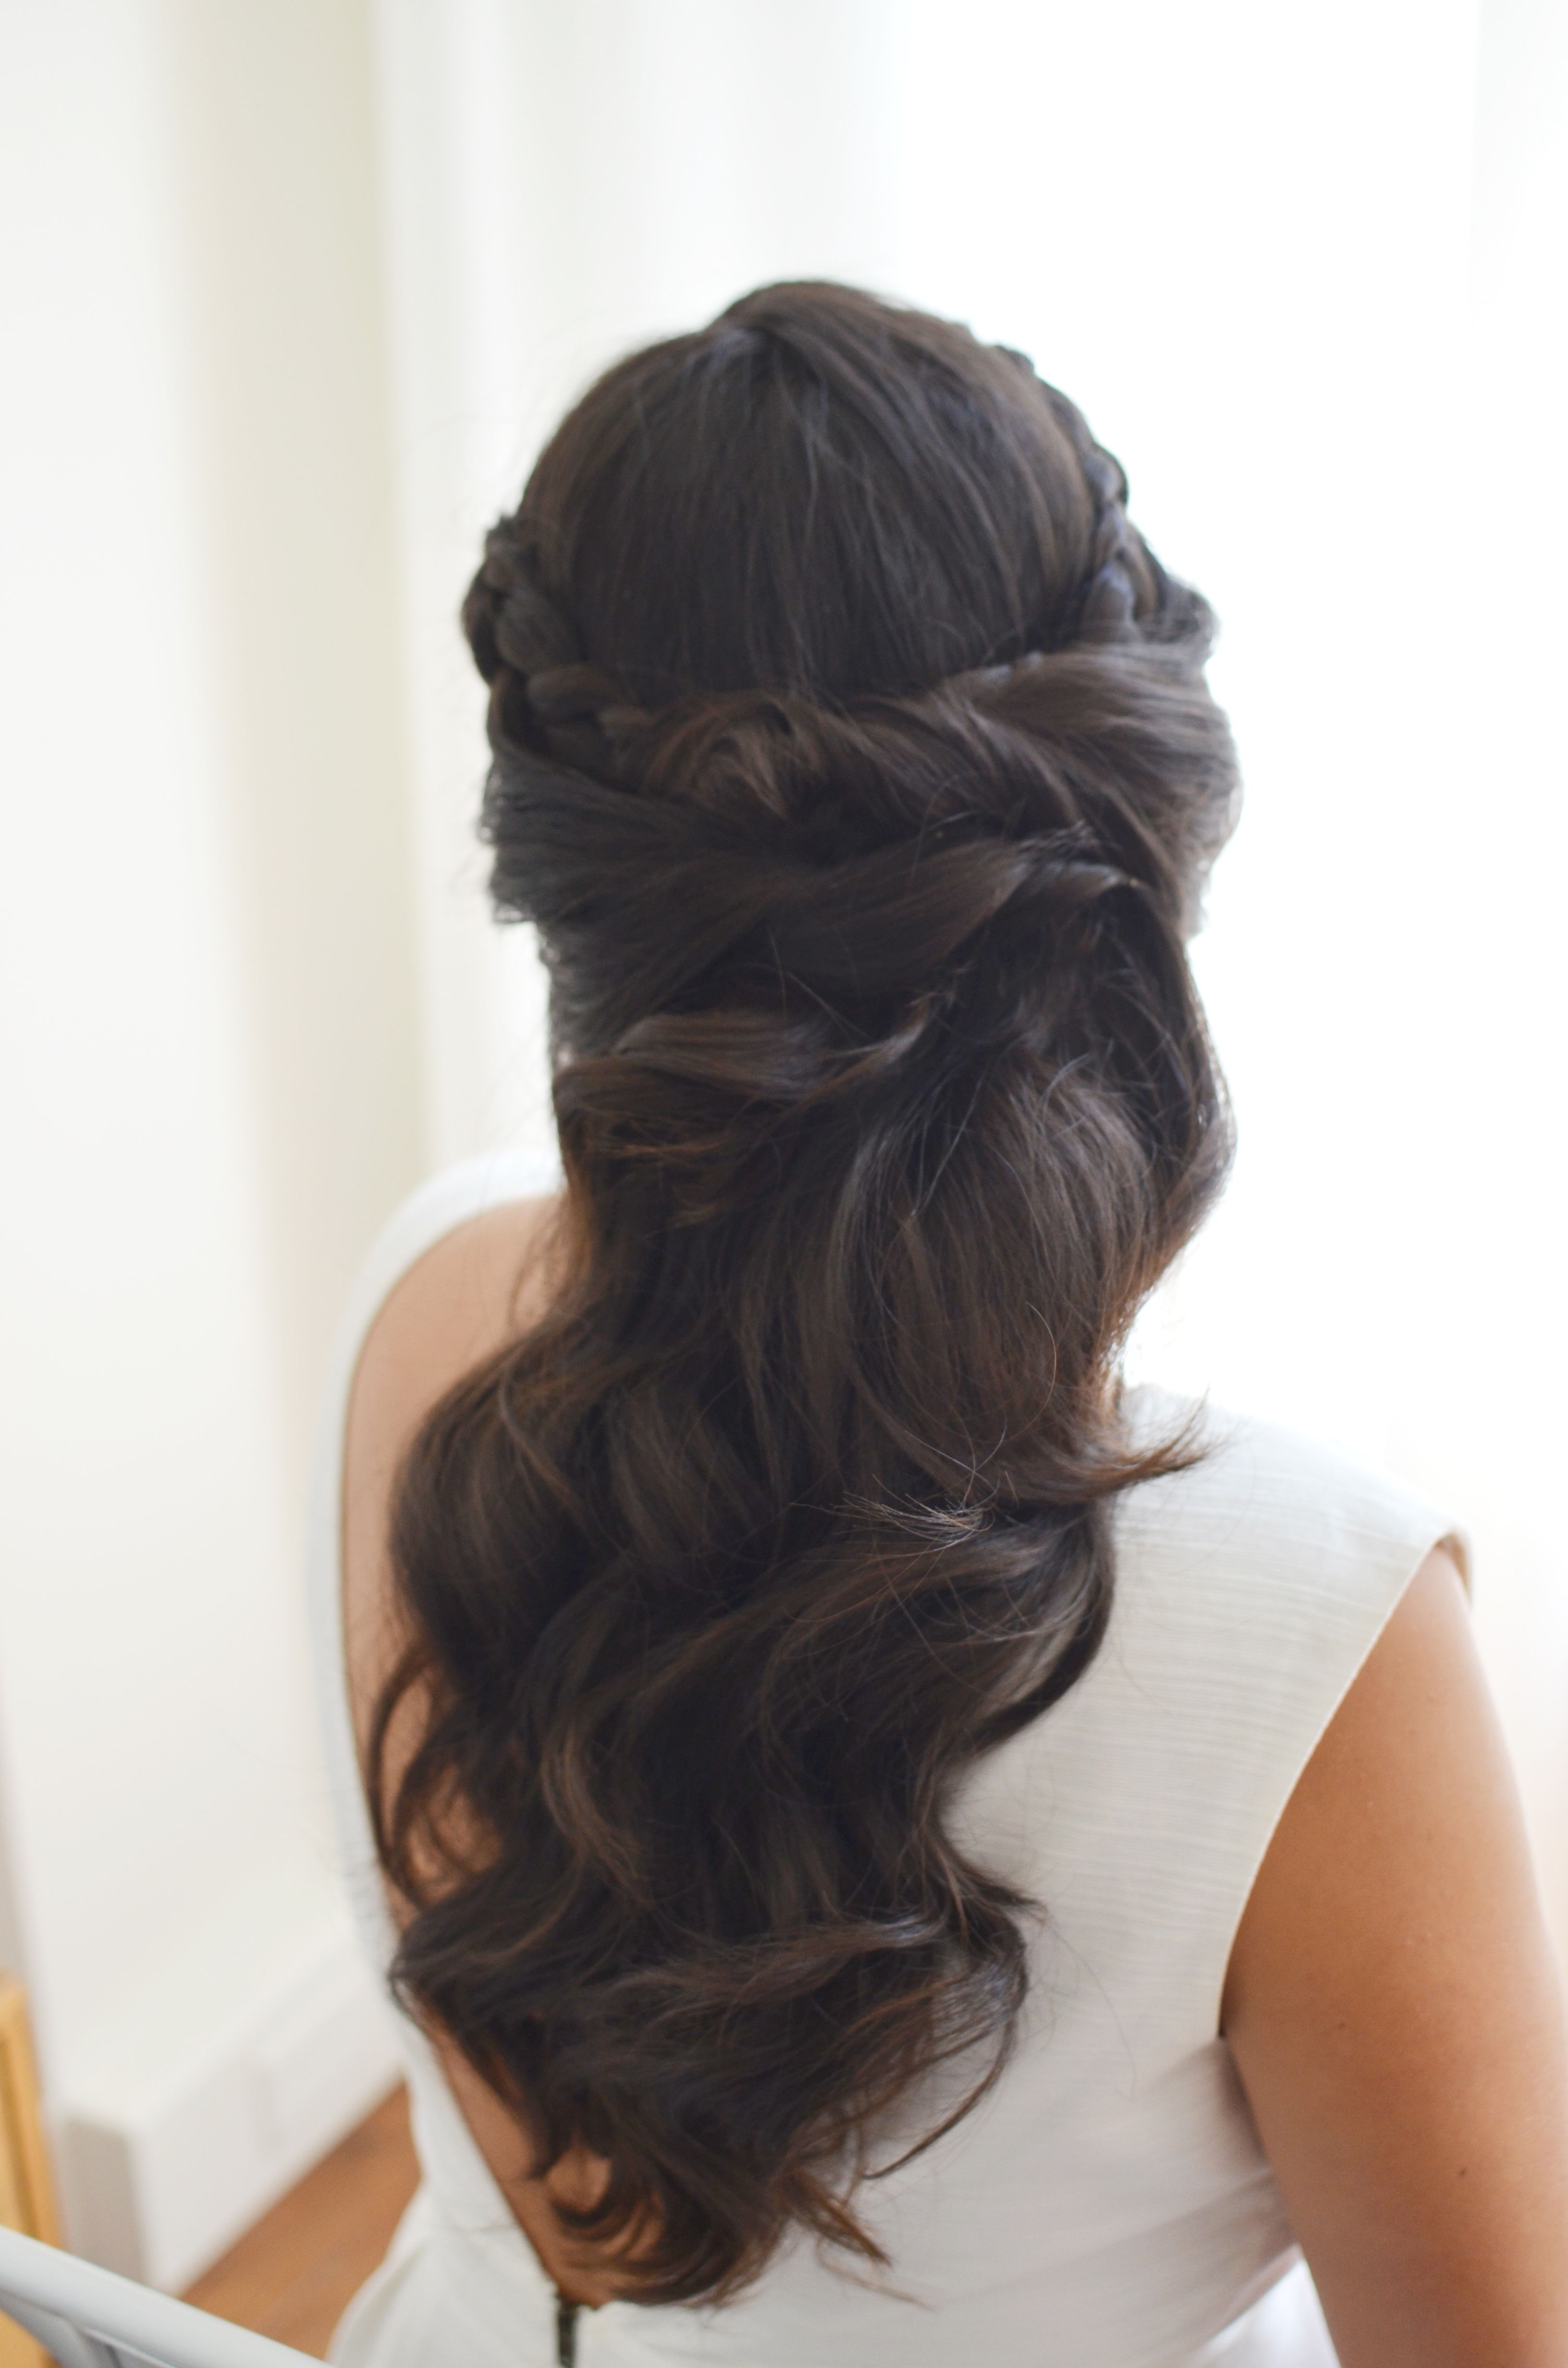 Bride Half Updo Hairstyles | Justswimfl Intended For Elegant Half Updo Hairstyles (View 8 of 15)